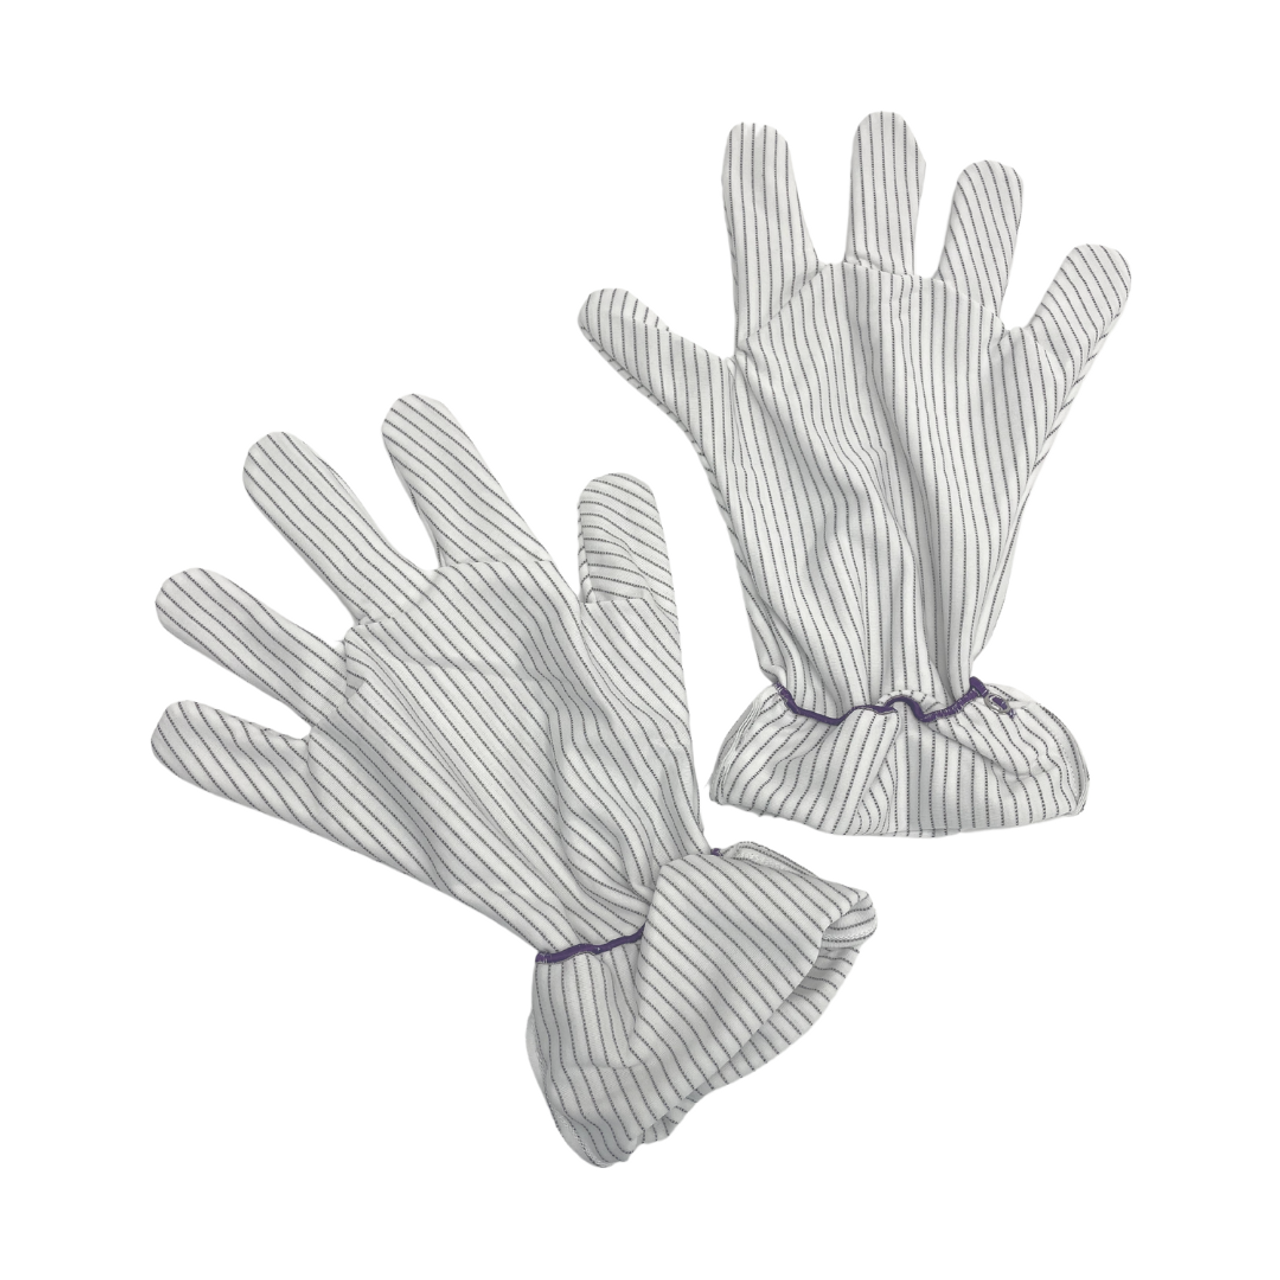 https://cdn11.bigcommerce.com/s-m7m57el3vo/images/stencil/1280x1280/products/33881/59140/ESD_Striped_Gloves_3__93261.1676662838.png?c=2